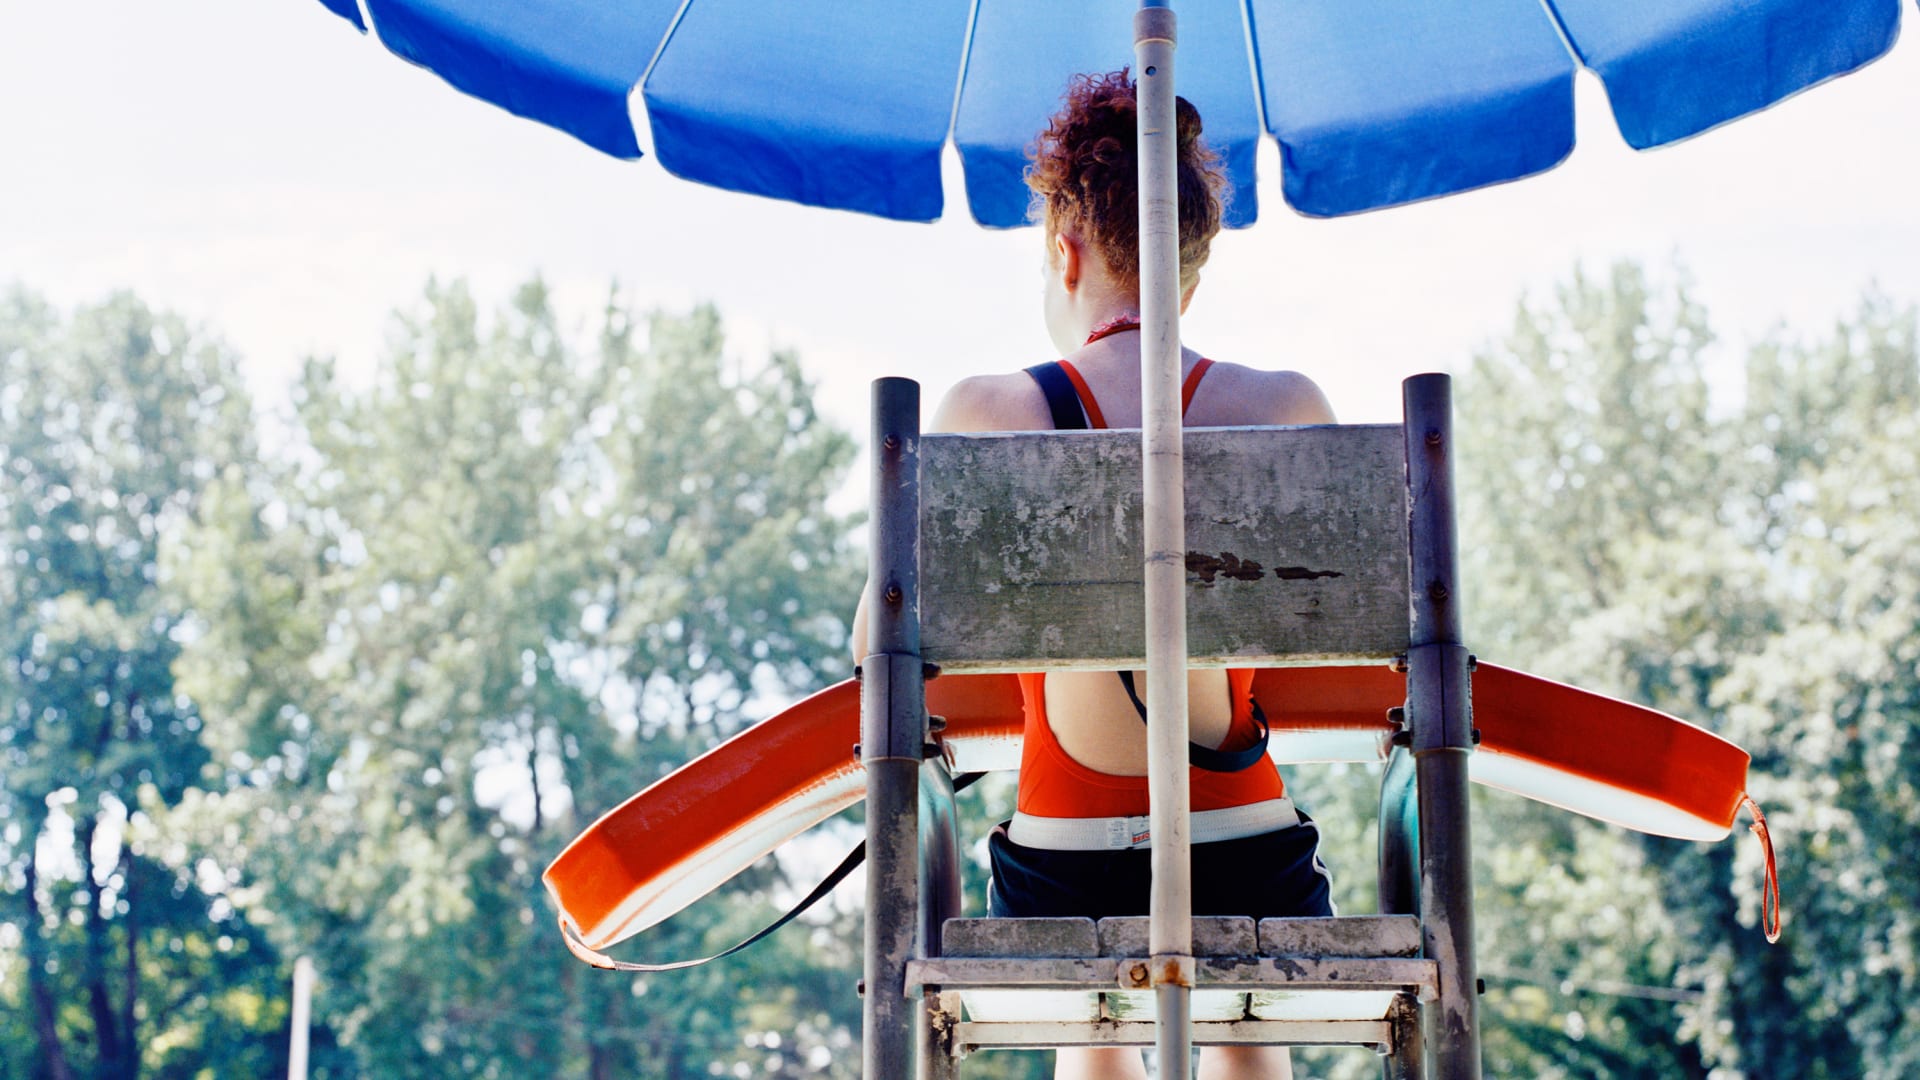 Hiring for Summer Is About to Get Harder. 3 Ways to Ease the Seasonal Sting